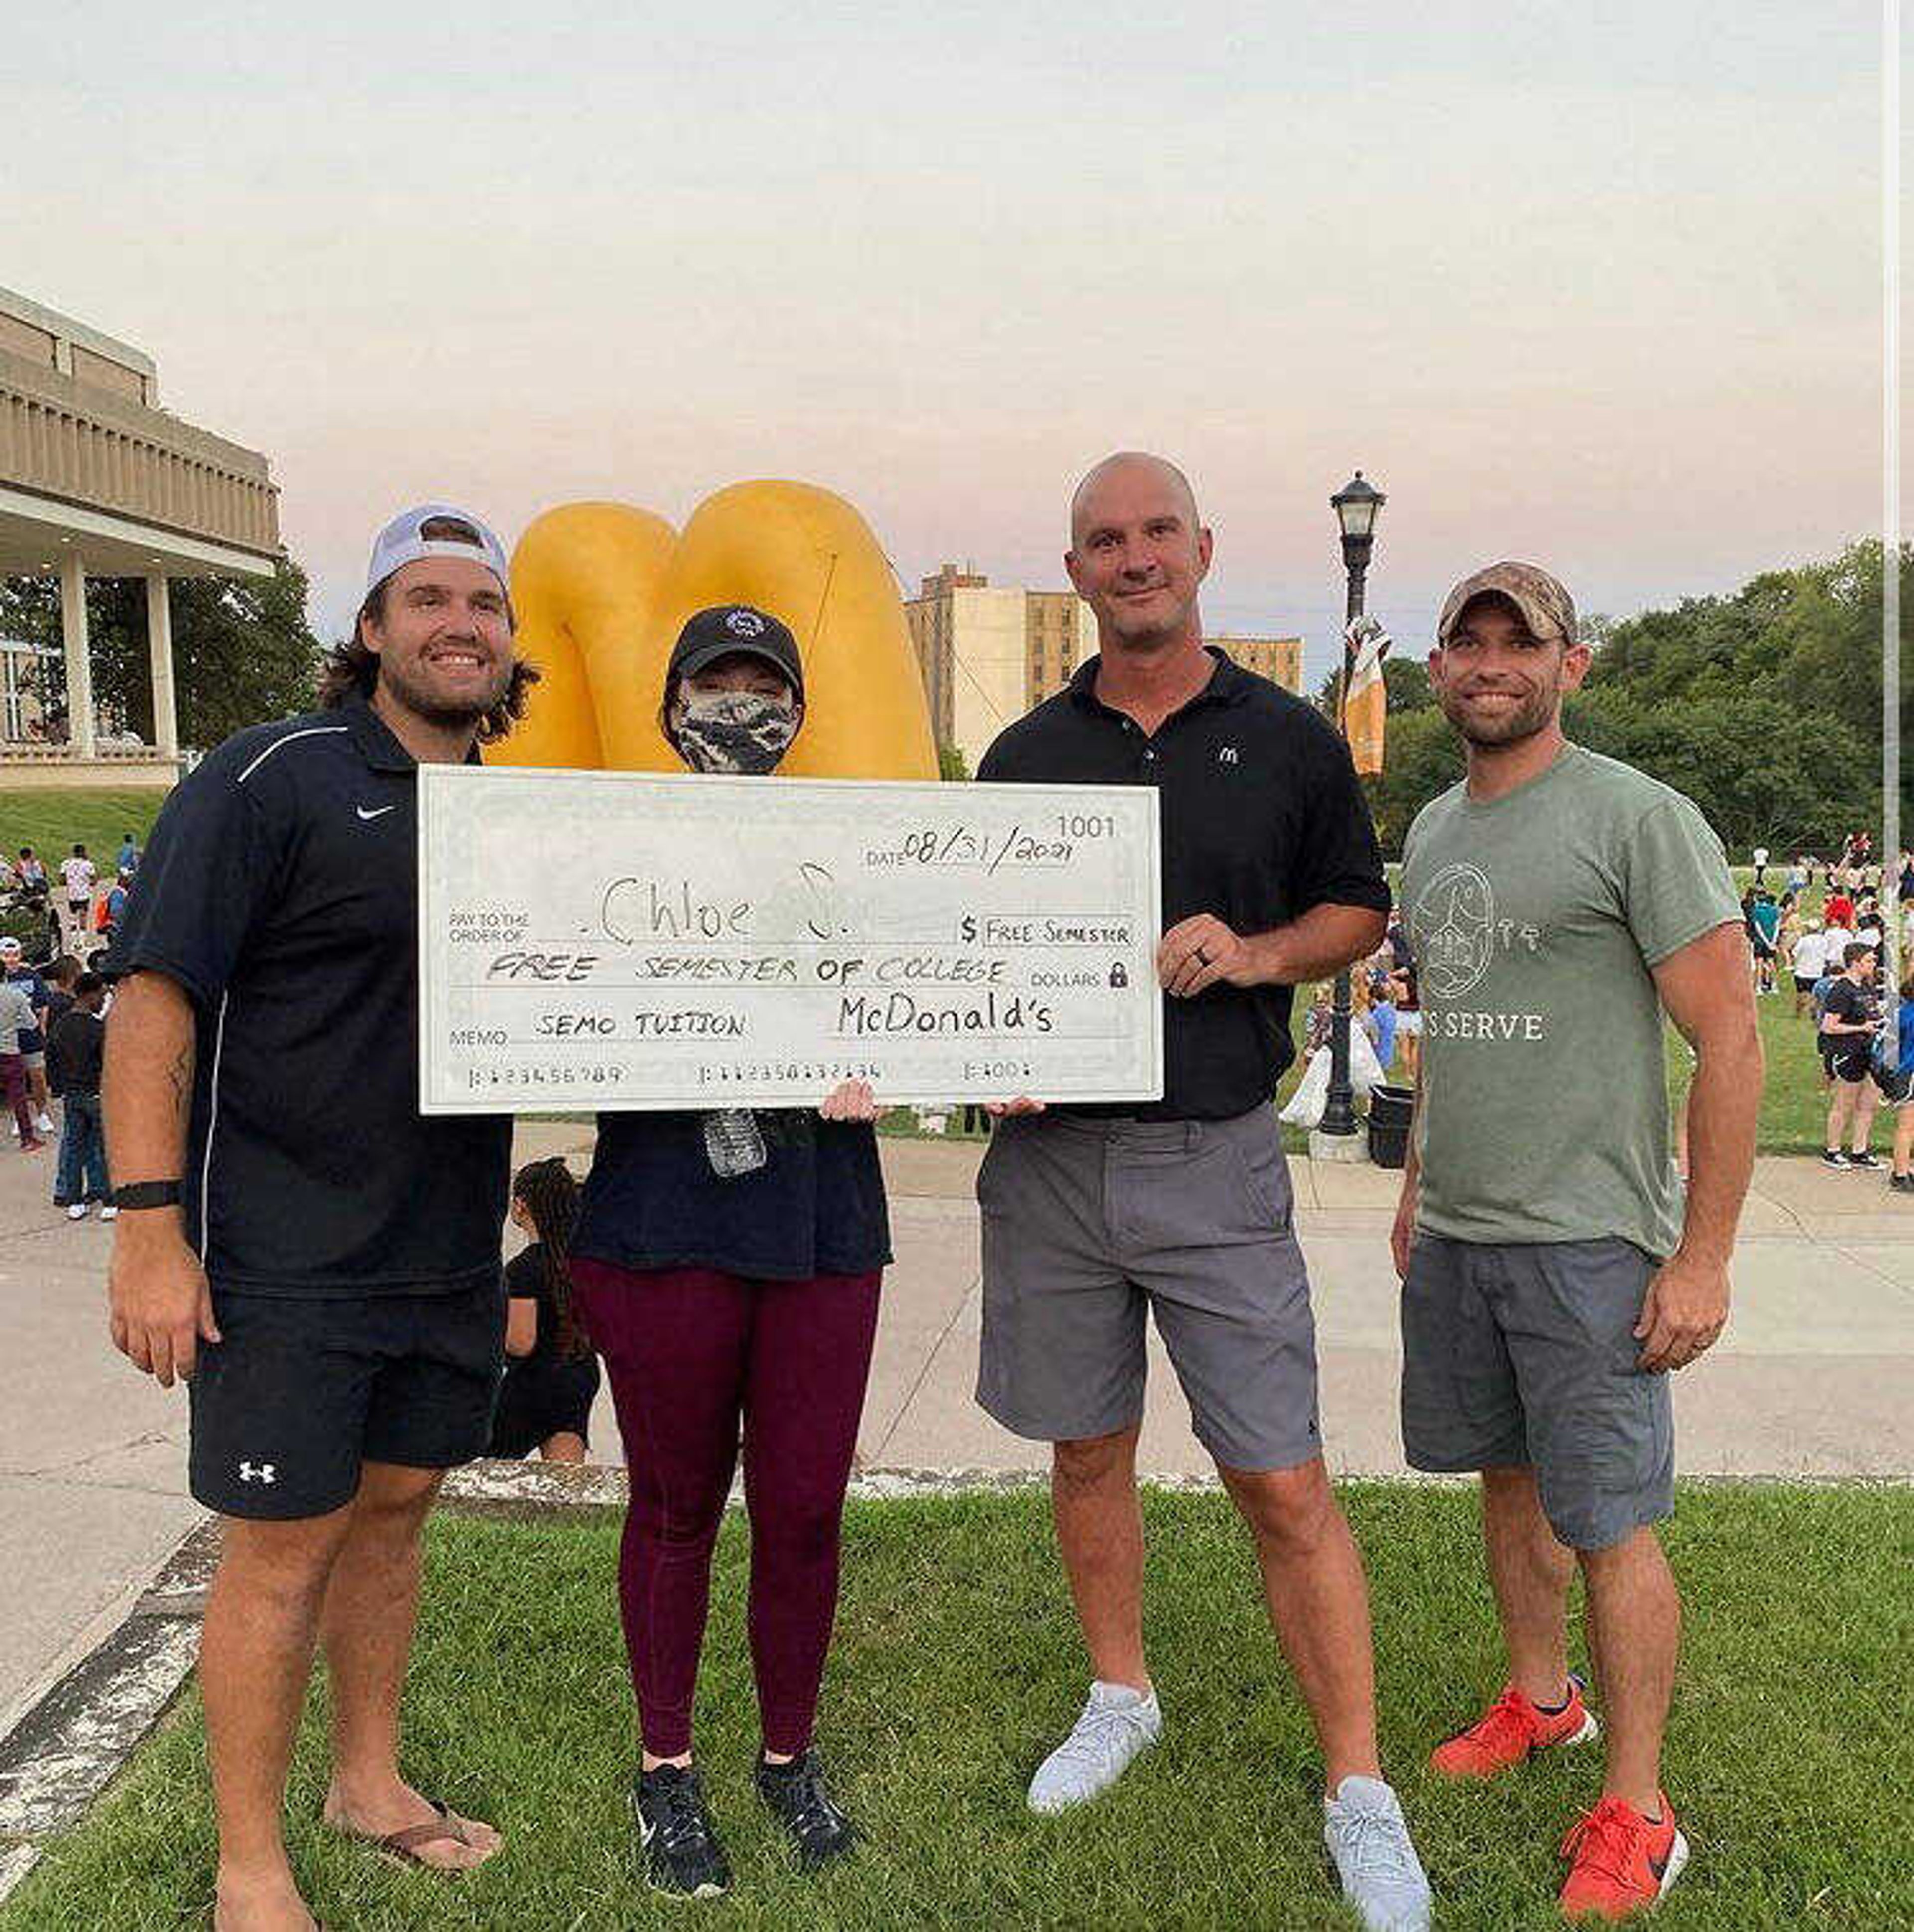 Student and organizers pose with free semester of college check at "Big Bucks & BBQ" event. From left to right: Joey Babich, Chloe Sutherland, John Haggerty, Reece Hammond. Photo by Jeff Brune.